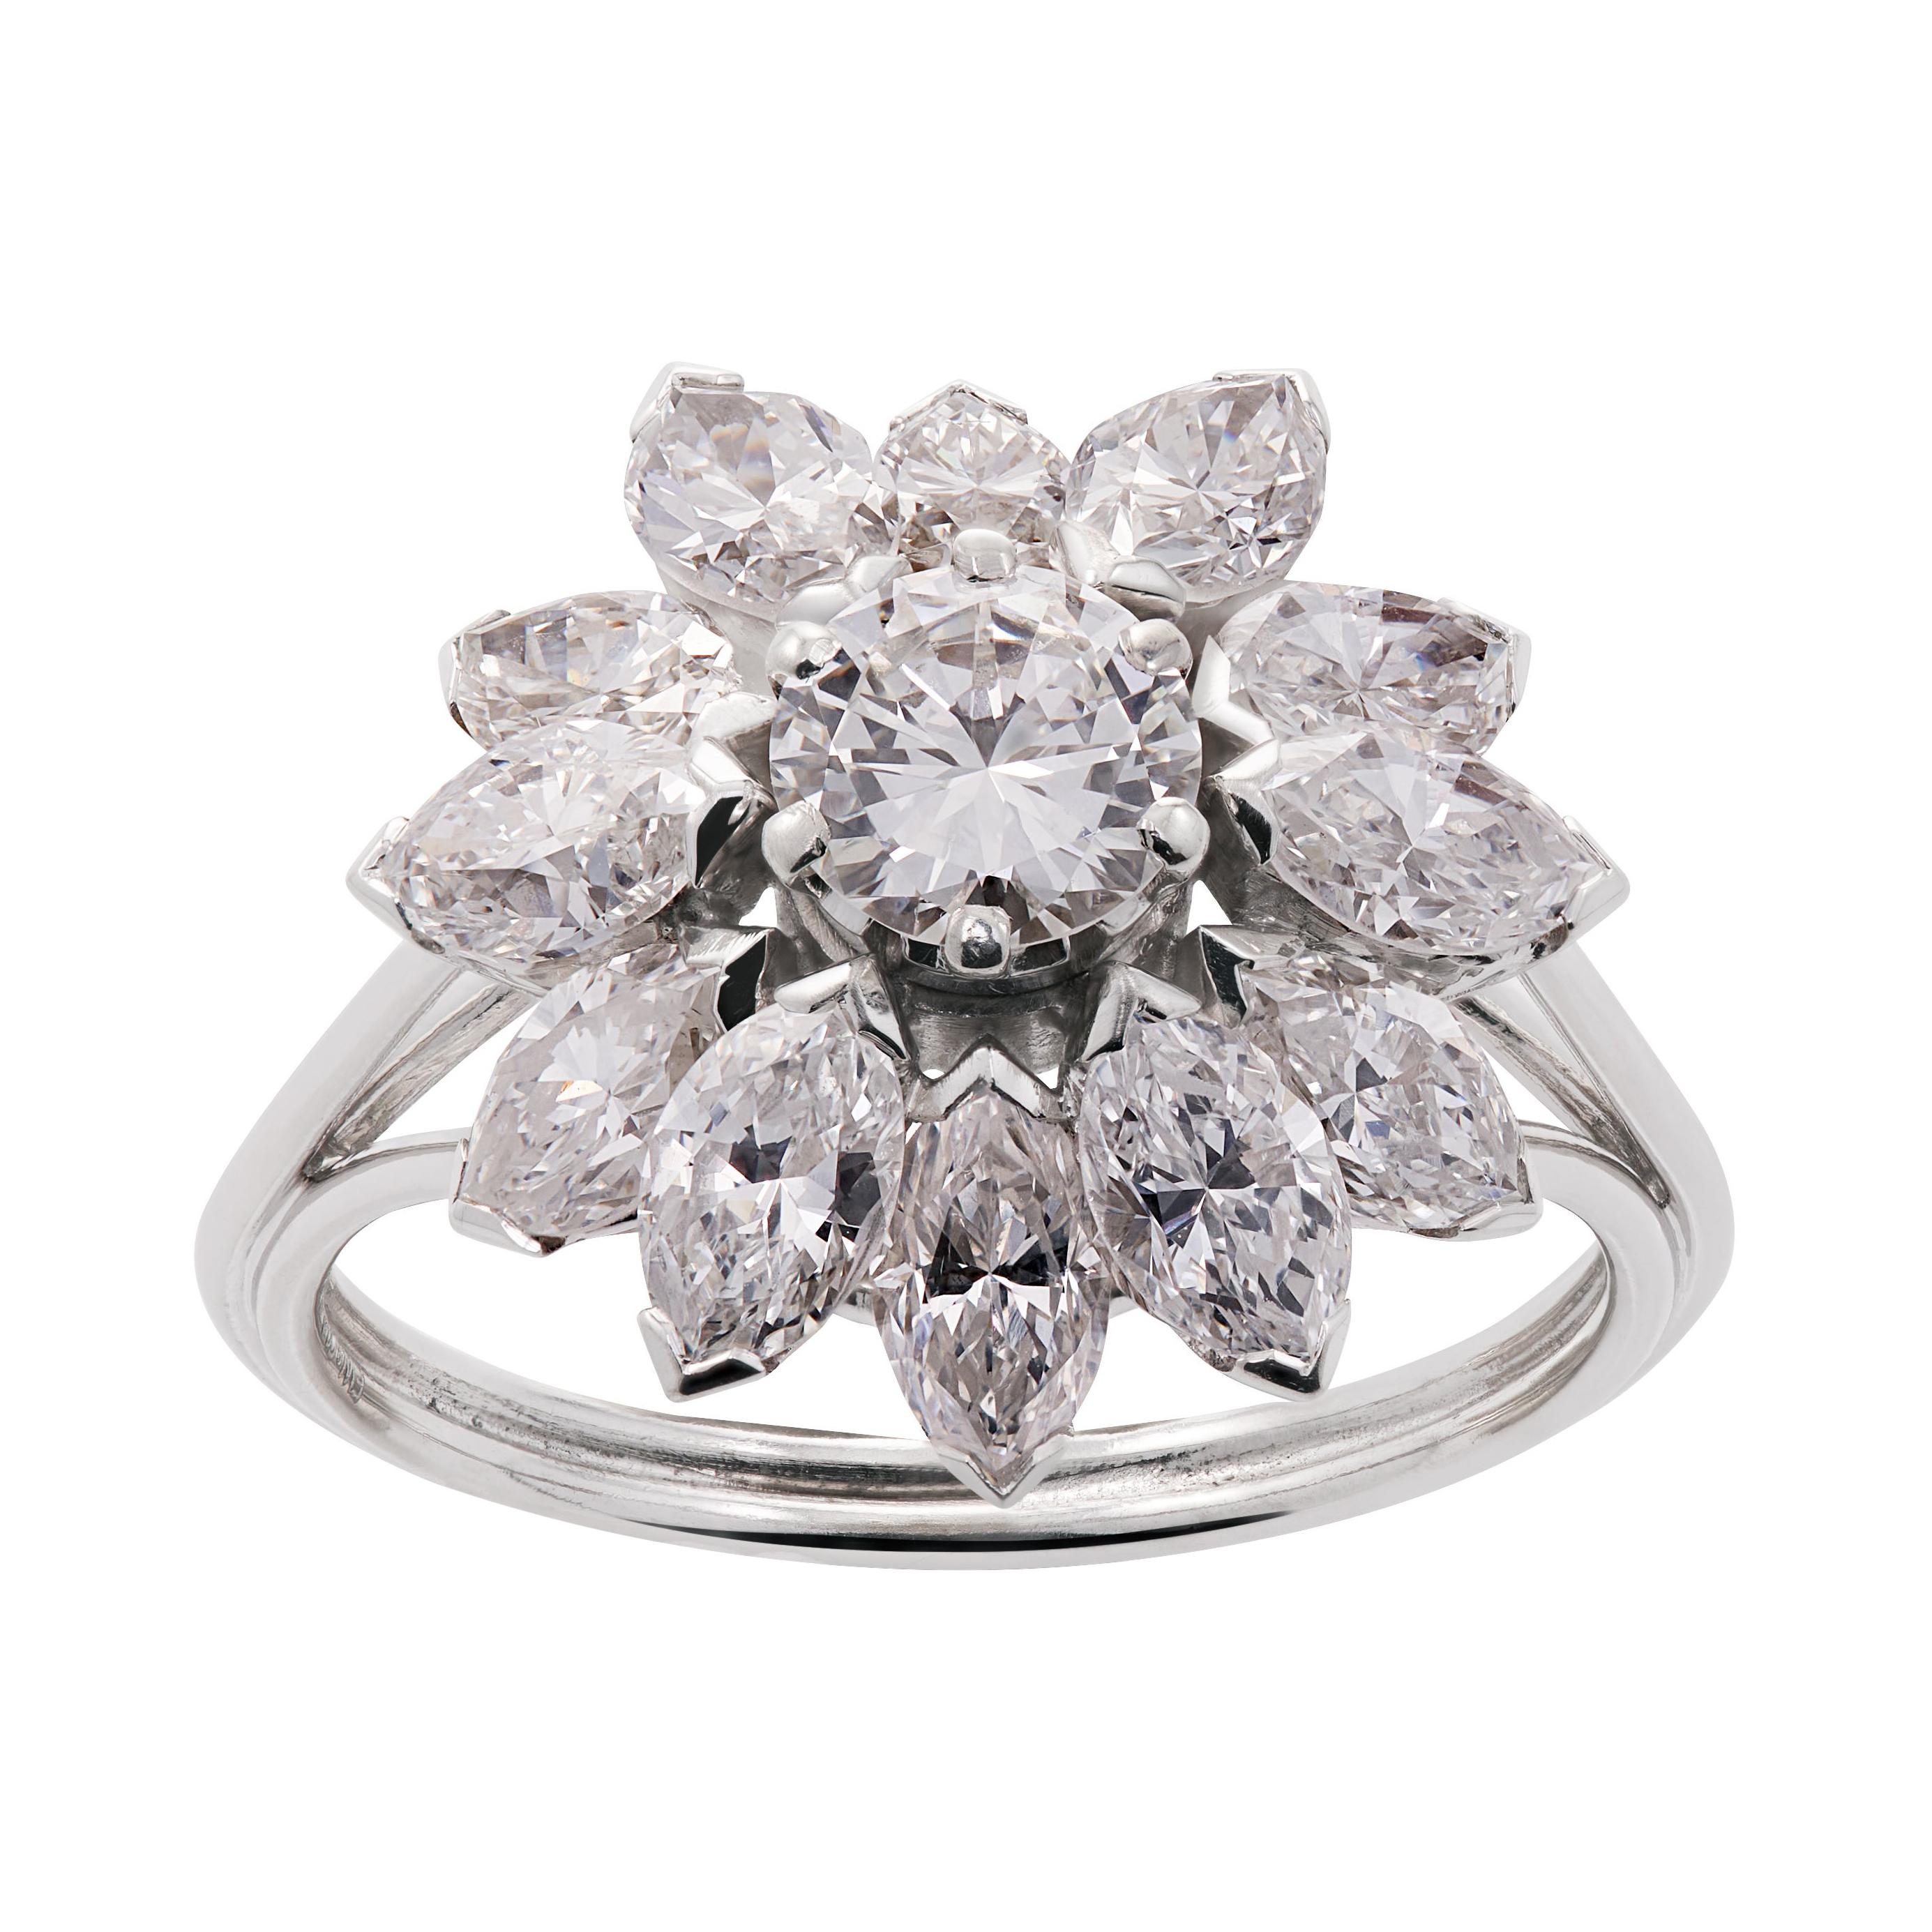 3.52cts Round Brilliant-Cut and Marquise Diamond Cocktail Ring For Sale